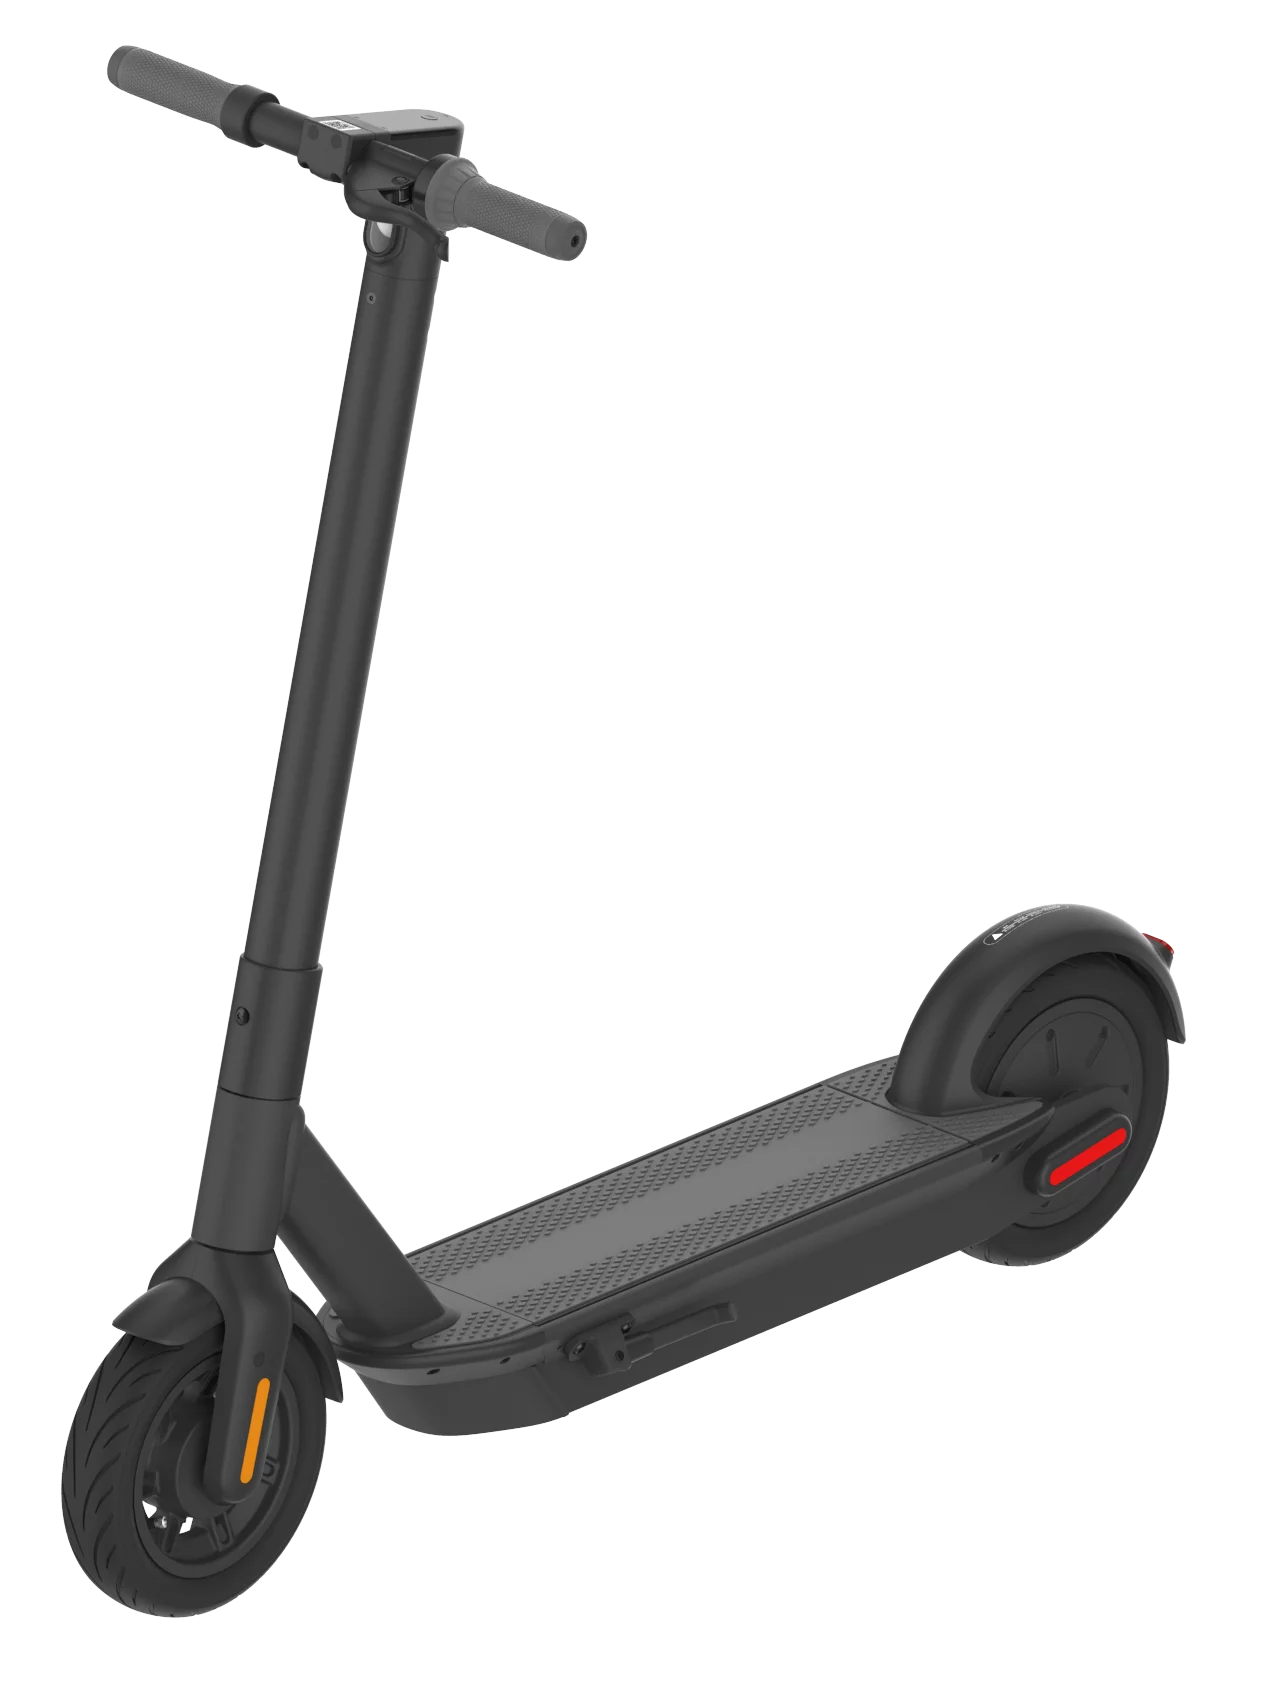 SEGWAY Max Pro scooter for sharing business